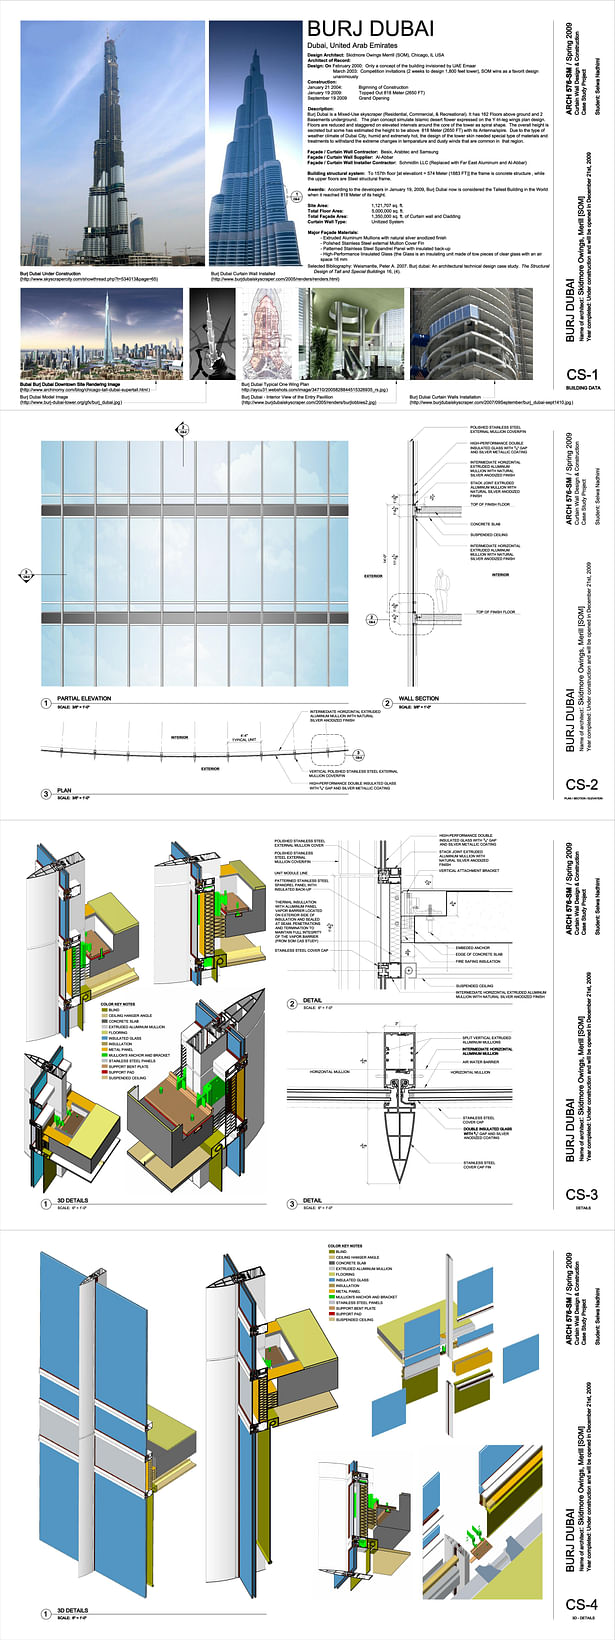 MASTERS IN ARCHITECTURE_CURTAIN WALLS CASE STUDY PROJECT